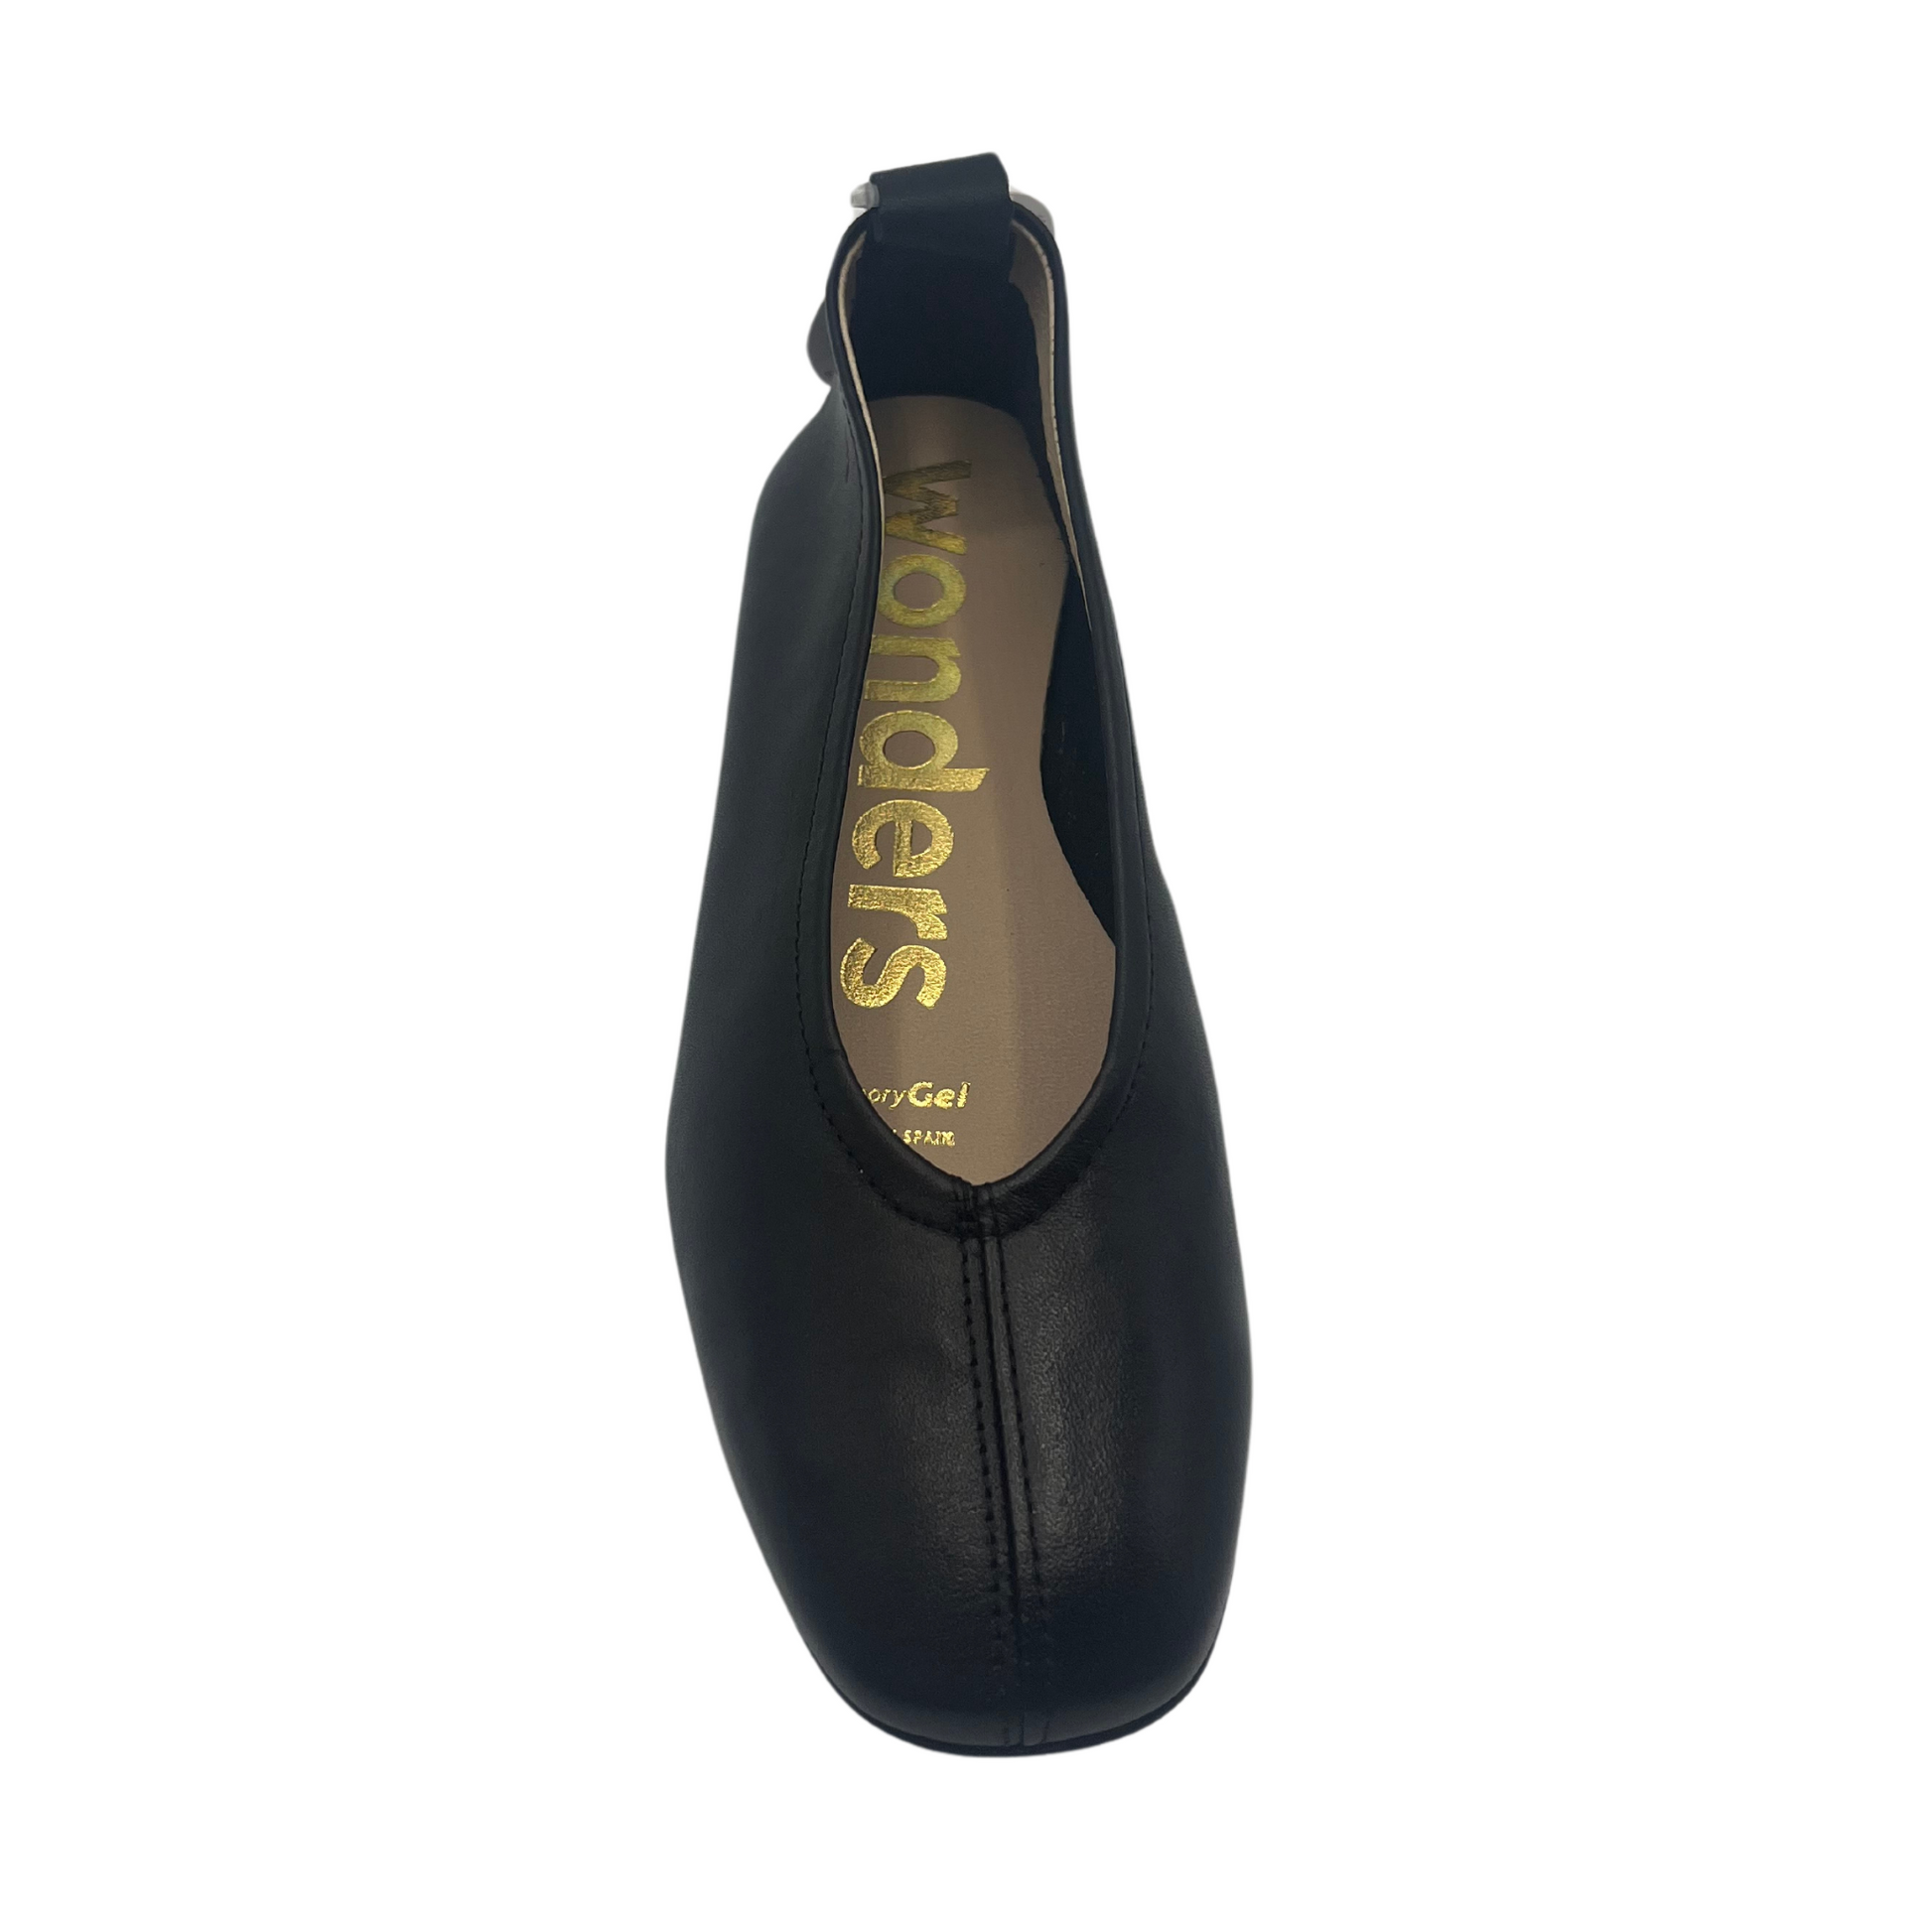 Top view of black leather ballet flat with rounded toe and pull tab on heel